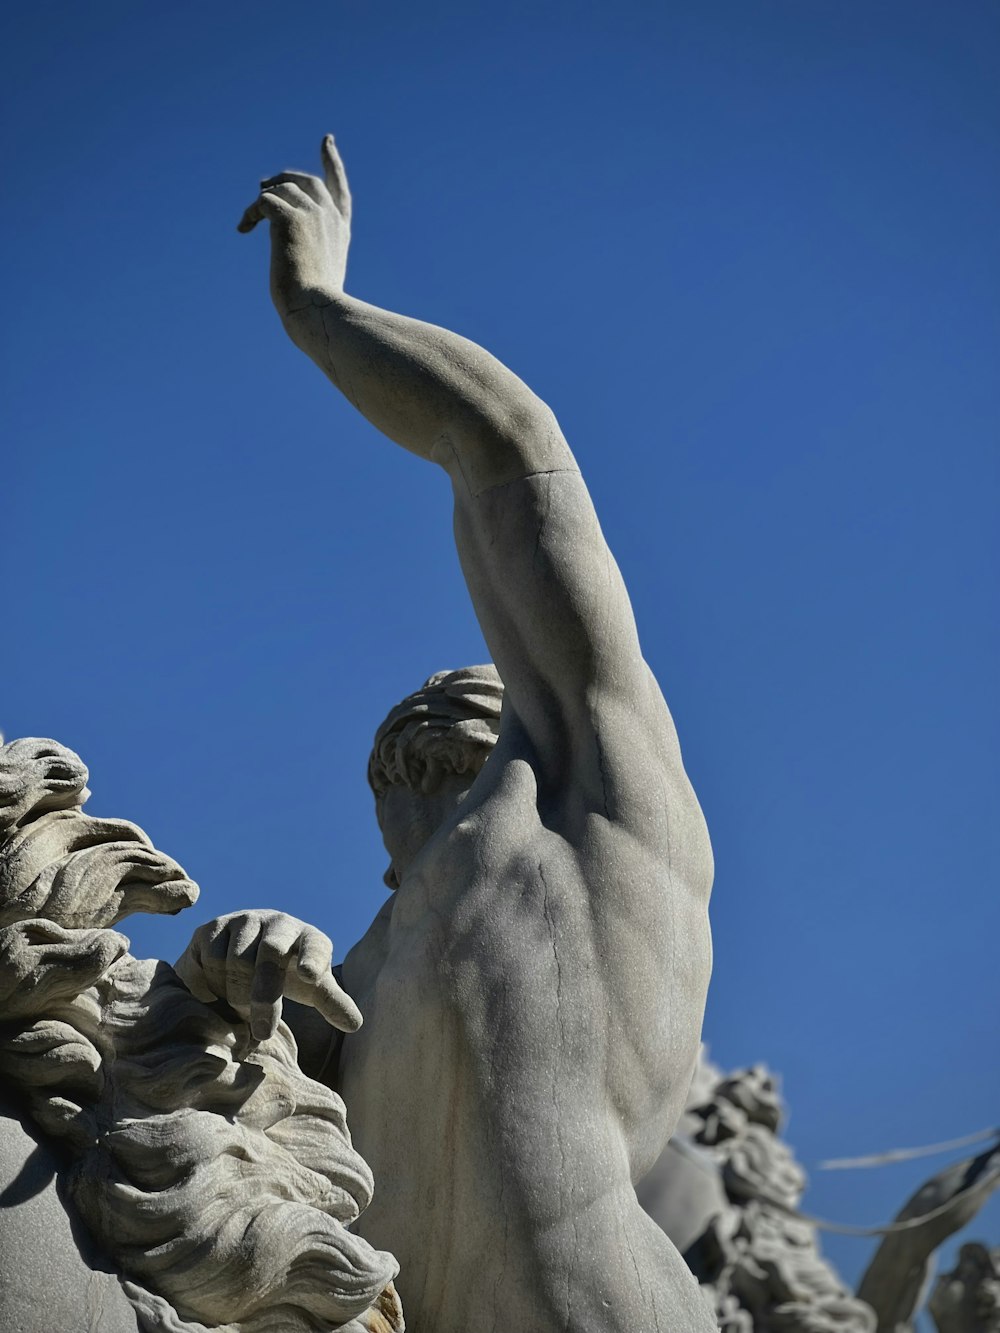 a statue of a man reaching up to the sky